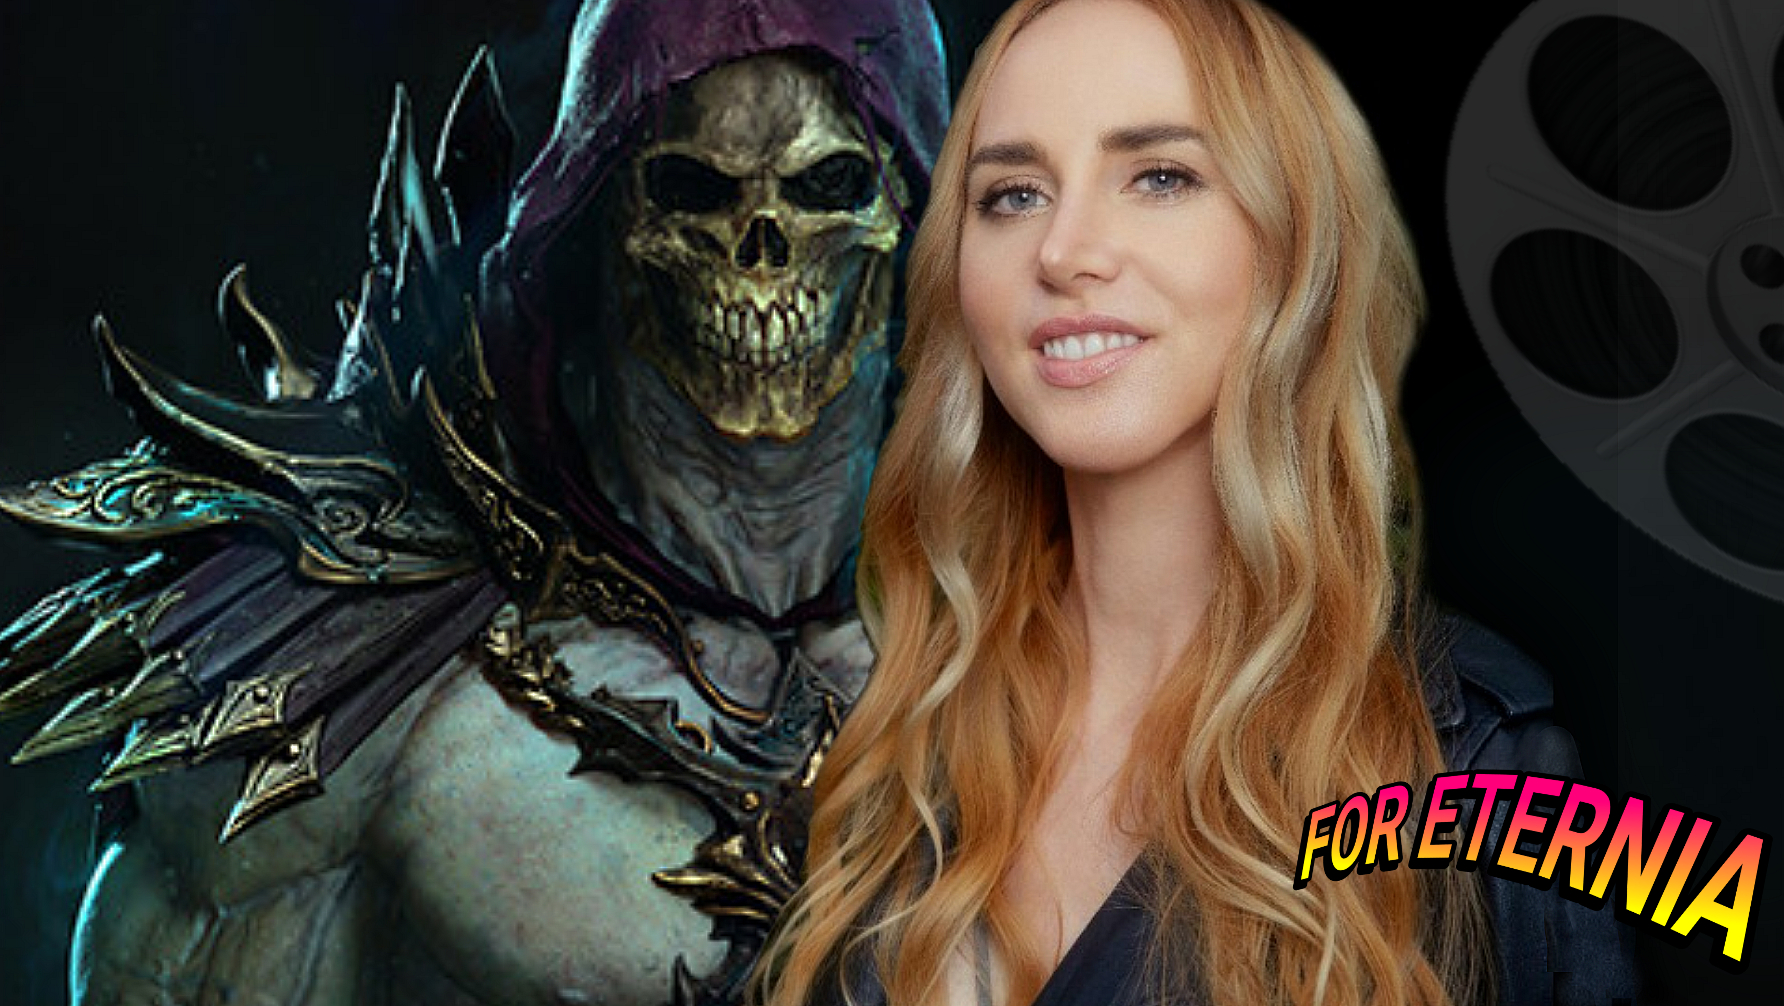 New ”Masters of the Universe” Movie ex-screenwriter Lindsey Beer says the project needs a strong vision